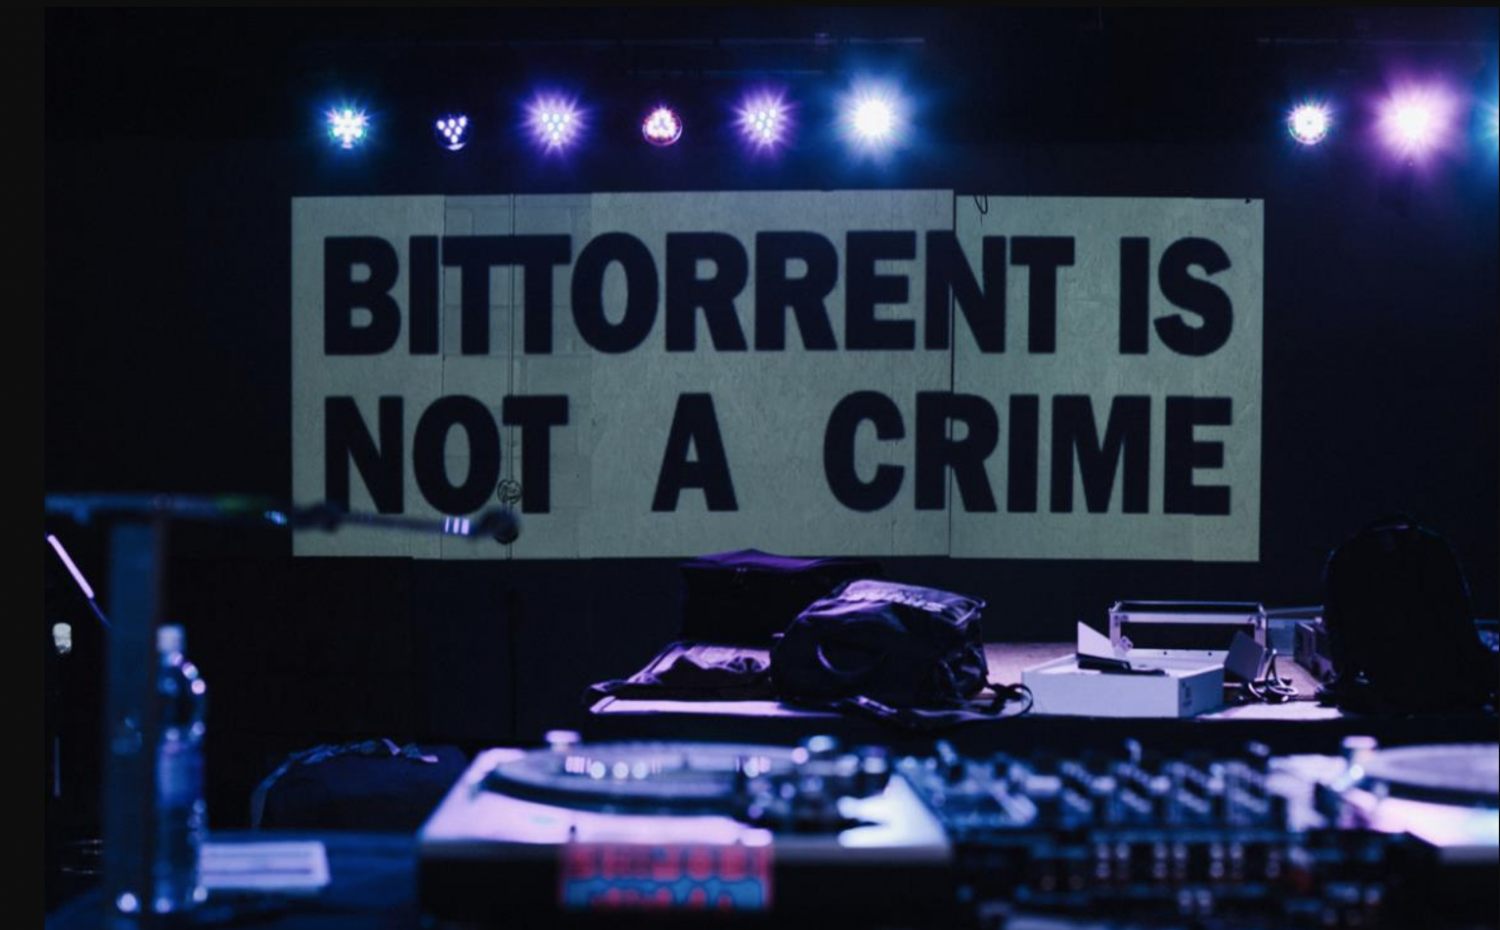 Tron’s BitTorrent Acquisition Triggers String Of Employee Exits